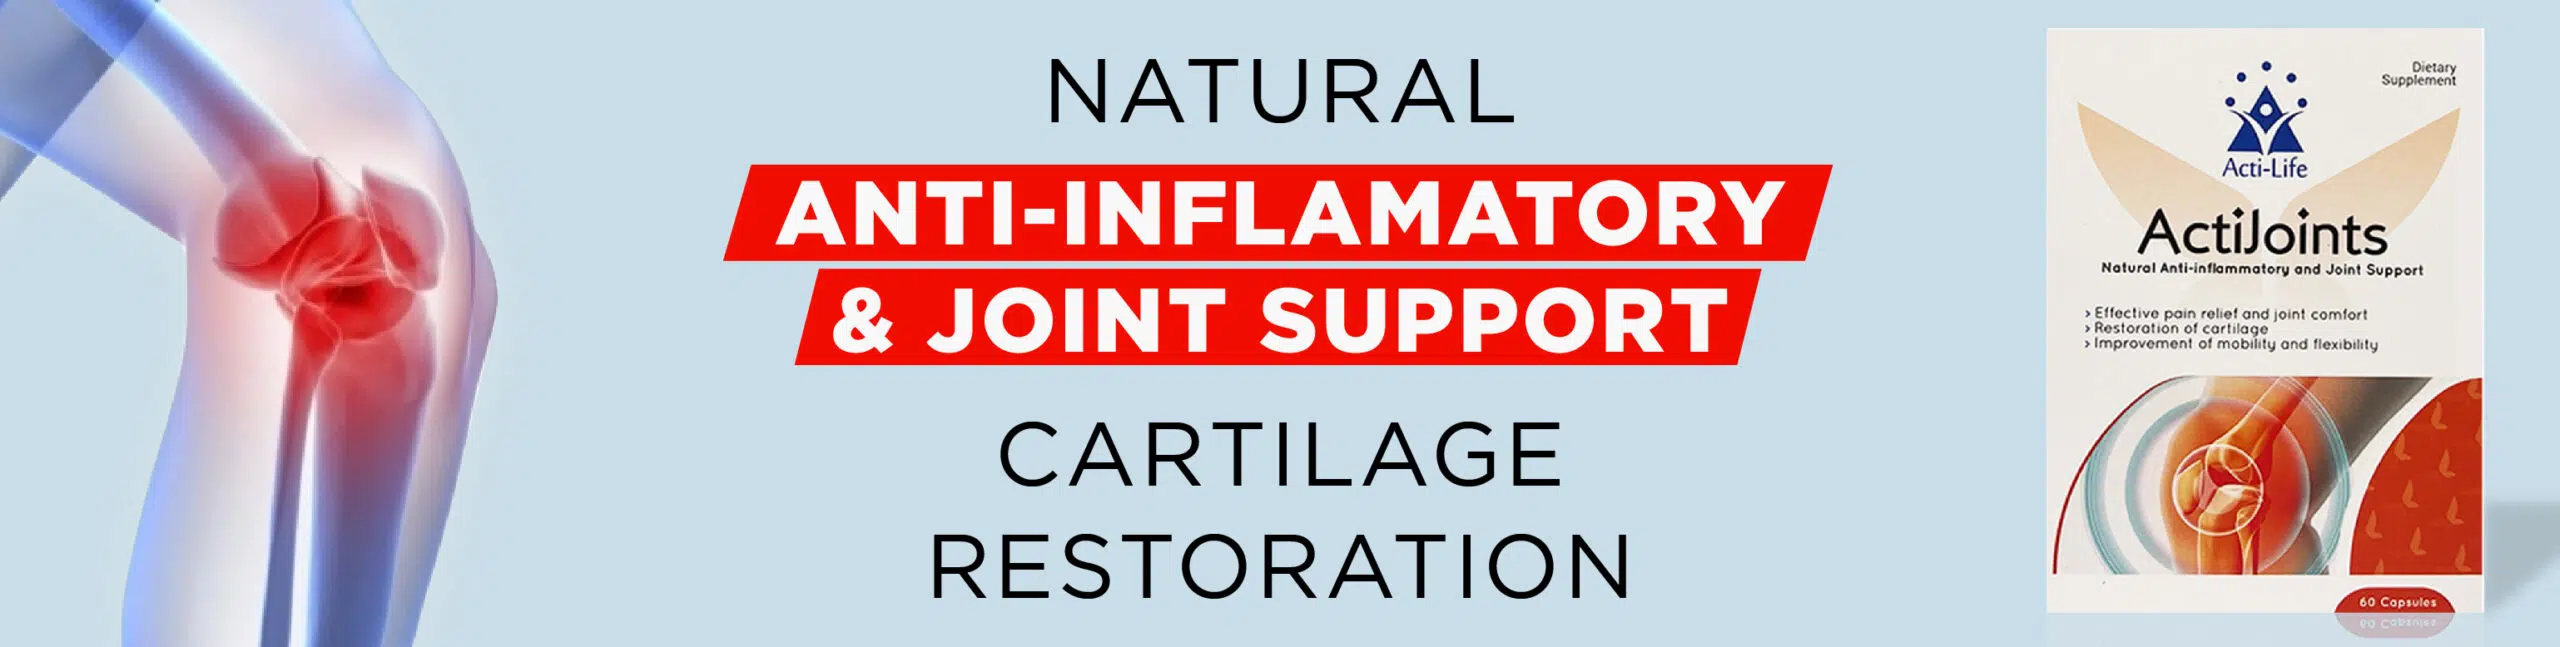 Natural inflammatory and joint support cartilage restoration actijoints